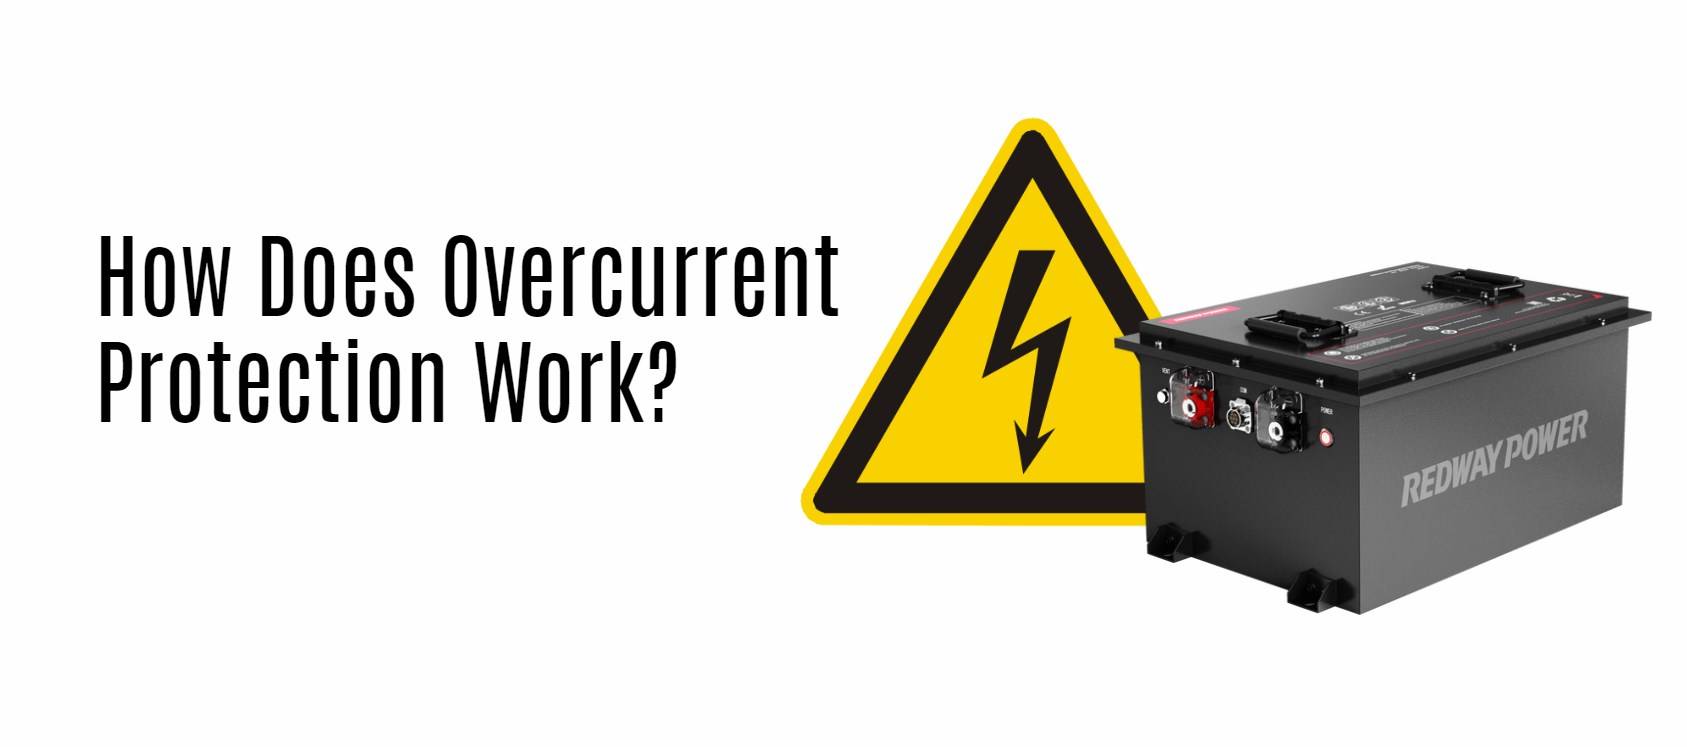 How Does Overcurrent Protection Work?